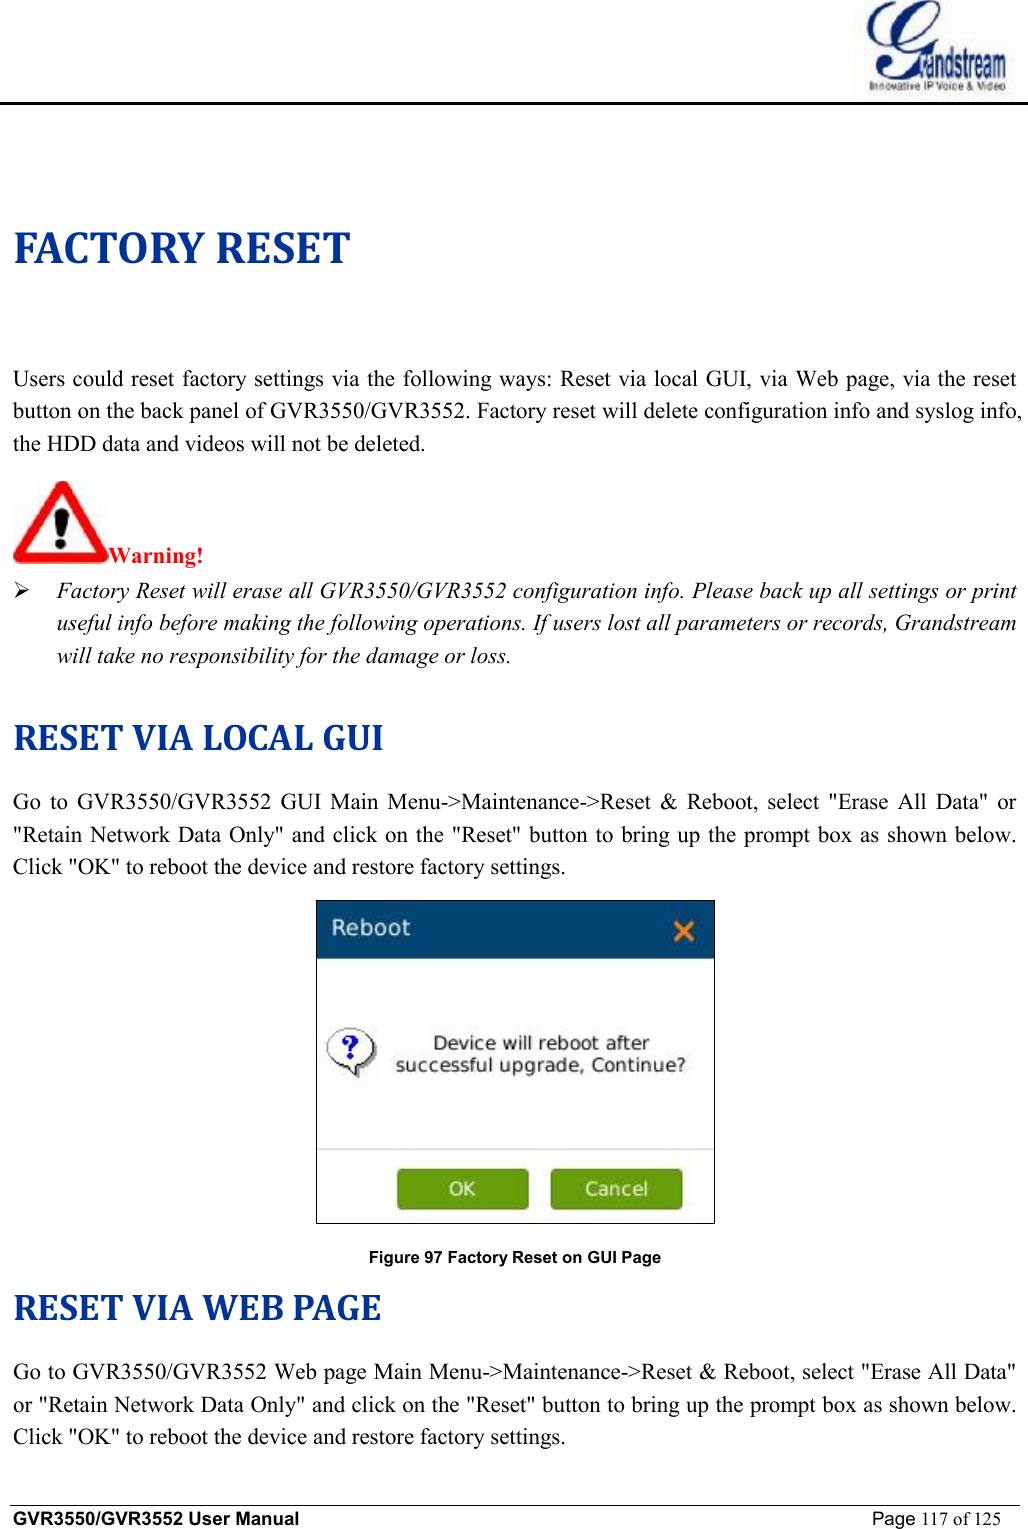    GVR3550/GVR3552 User Manual                                                             Page 117 of 125        FACTORY RESET Users could reset factory settings via the following ways: Reset via local GUI, via Web page, via the reset button on the back panel of GVR3550/GVR3552. Factory reset will delete configuration info and syslog info, the HDD data and videos will not be deleted.  Warning!    Ø Factory Reset will erase all GVR3550/GVR3552 configuration info. Please back up all settings or print useful info before making the following operations. If users lost all parameters or records, Grandstream will take no responsibility for the damage or loss.  RESET VIA LOCAL GUI Go to GVR3550/GVR3552 GUI Main Menu-&gt;Maintenance-&gt;Reset &amp; Reboot, select &quot;Erase All Data&quot; or &quot;Retain Network Data Only&quot; and click on the &quot;Reset&quot; button to bring up the prompt box as shown below. Click &quot;OK&quot; to reboot the device and restore factory settings.  Figure 97 Factory Reset on GUI Page RESET VIA WEB PAGE Go to GVR3550/GVR3552 Web page Main Menu-&gt;Maintenance-&gt;Reset &amp; Reboot, select &quot;Erase All Data&quot; or &quot;Retain Network Data Only&quot; and click on the &quot;Reset&quot; button to bring up the prompt box as shown below. Click &quot;OK&quot; to reboot the device and restore factory settings. 